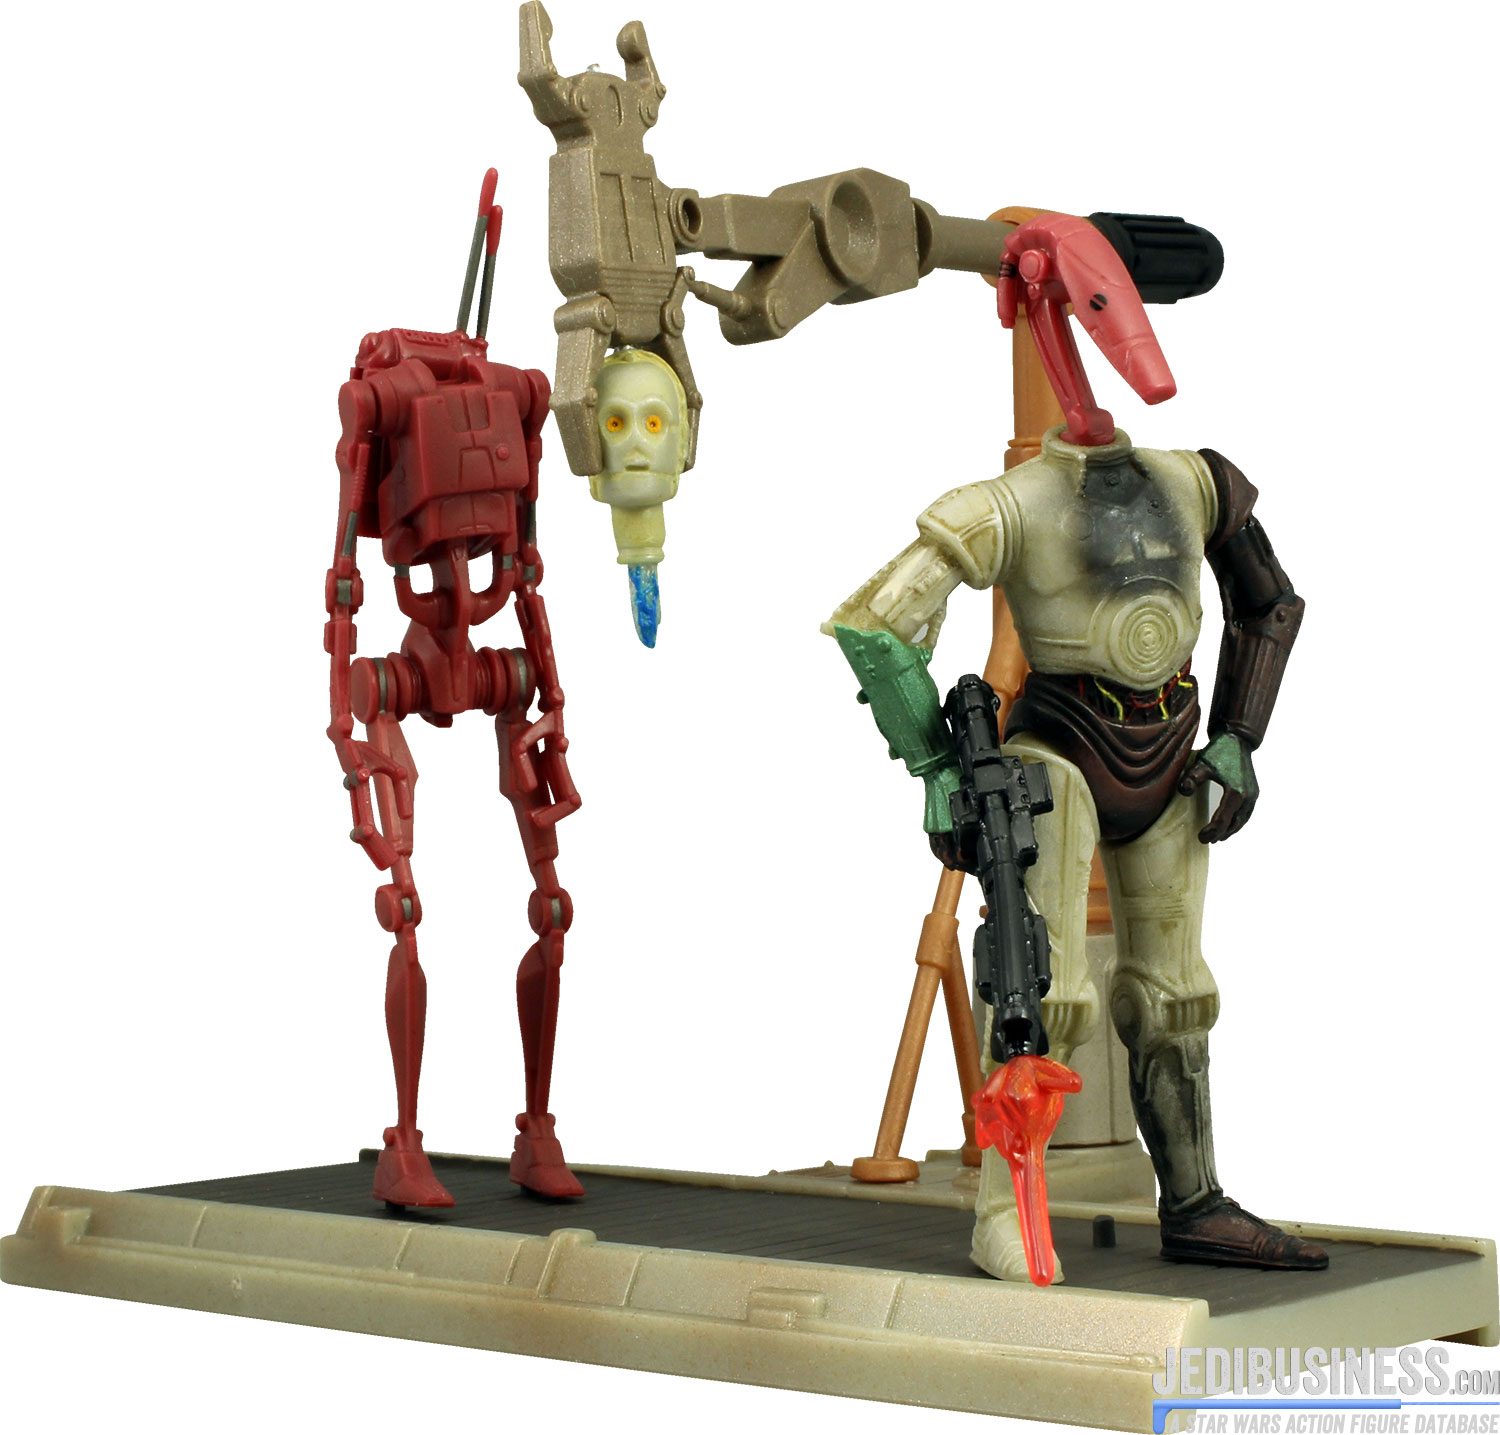 Battle Droid Droid Factory Assembly Line 2-Pack